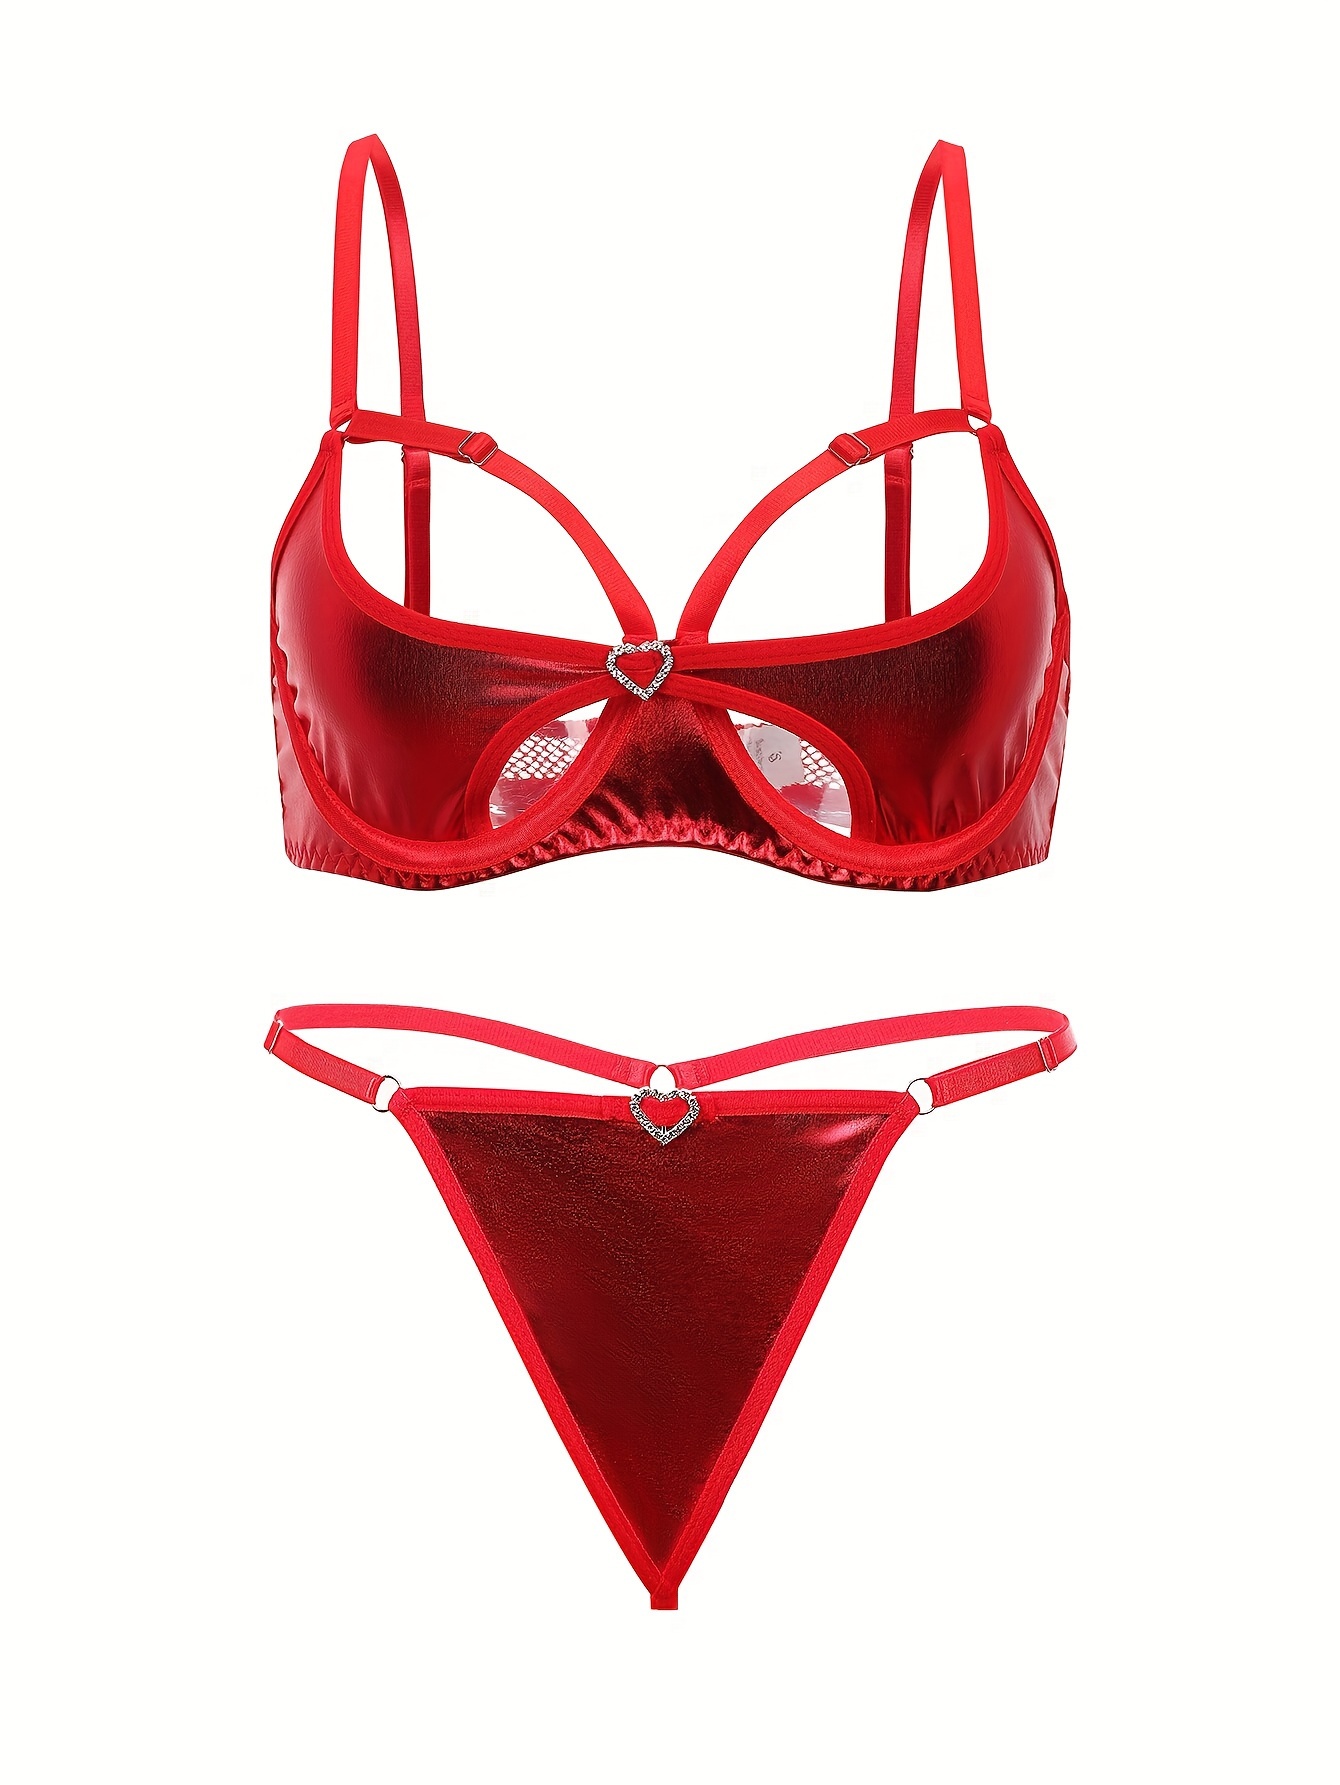 Bras for Women Sexy Lingerie for Women Women Sexy Steel Ring PU Pajamas  Sexy Underwear Sexy Lingerie Women's Lingerie Lingerie Set on Sale  Clearance Red,S 